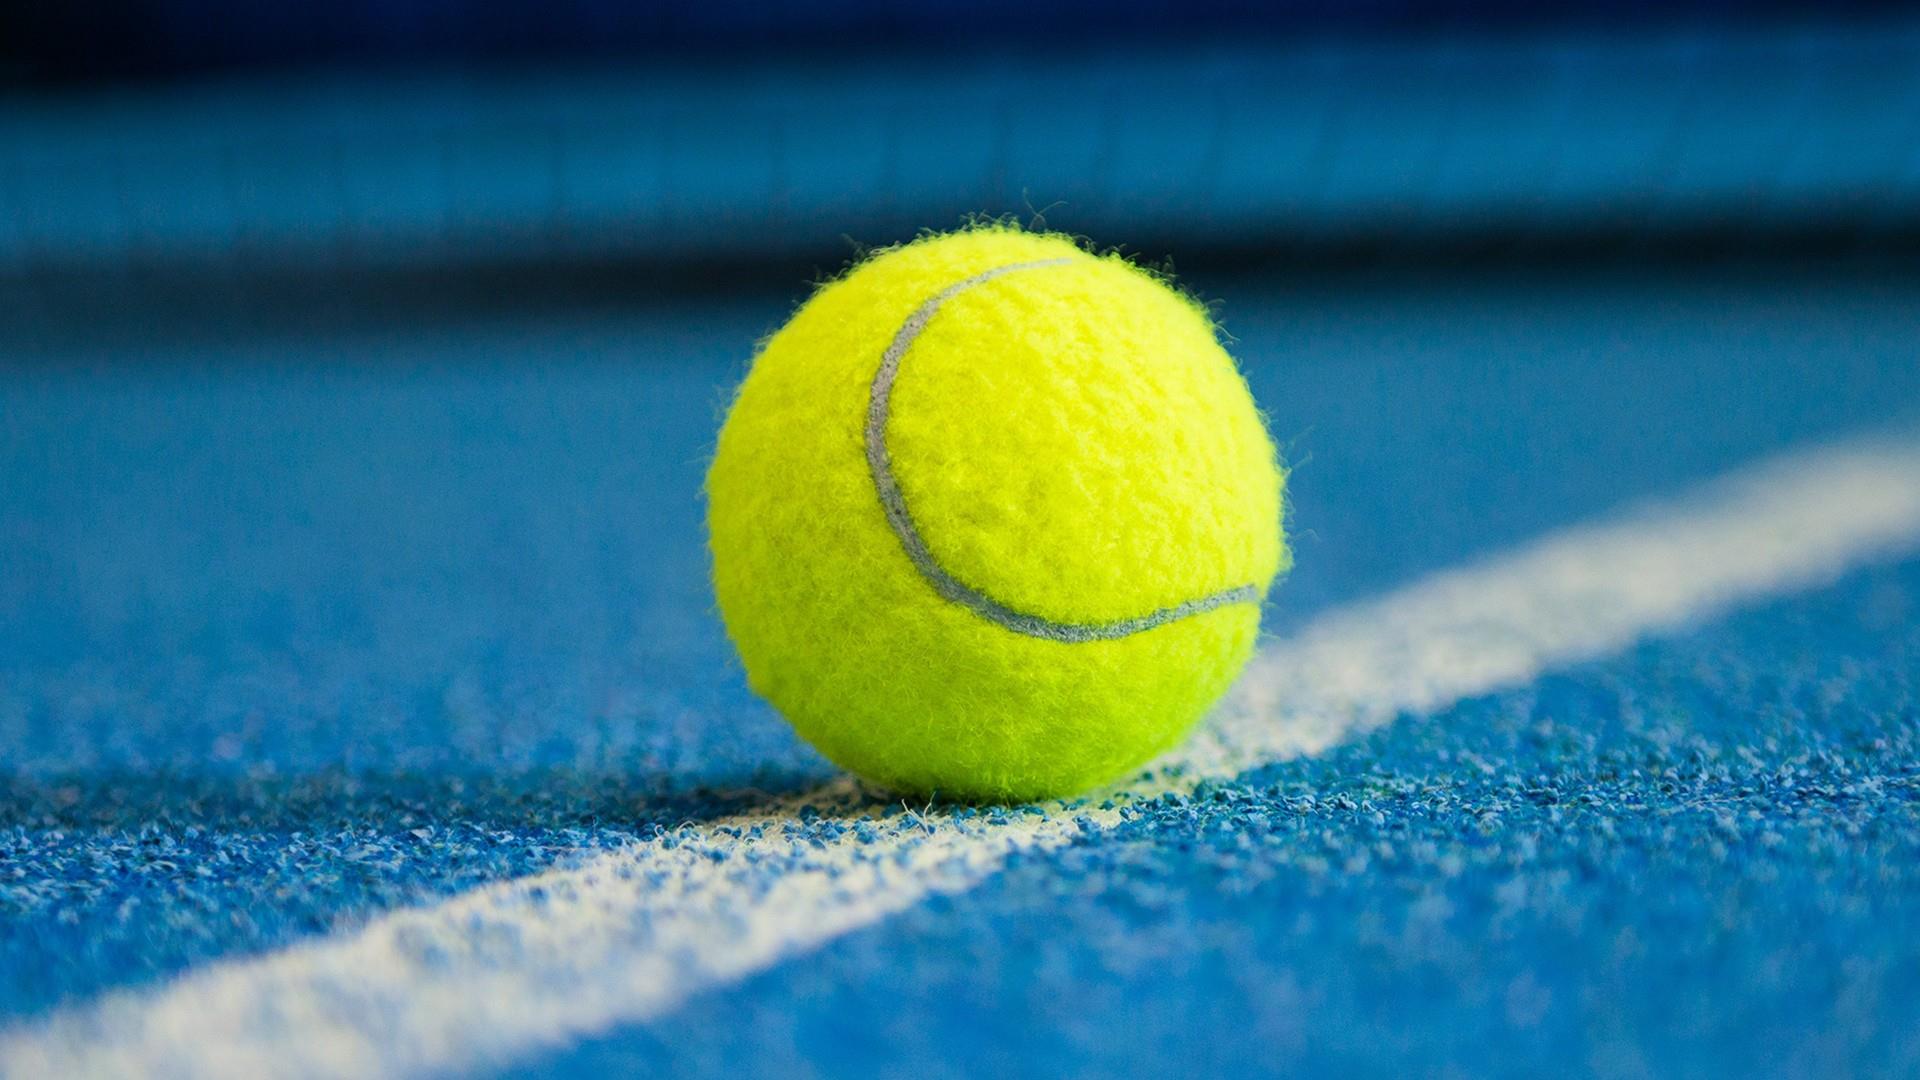 The latest internet debate: What color is a tennis ball? - TODAY.com1920 x 1080